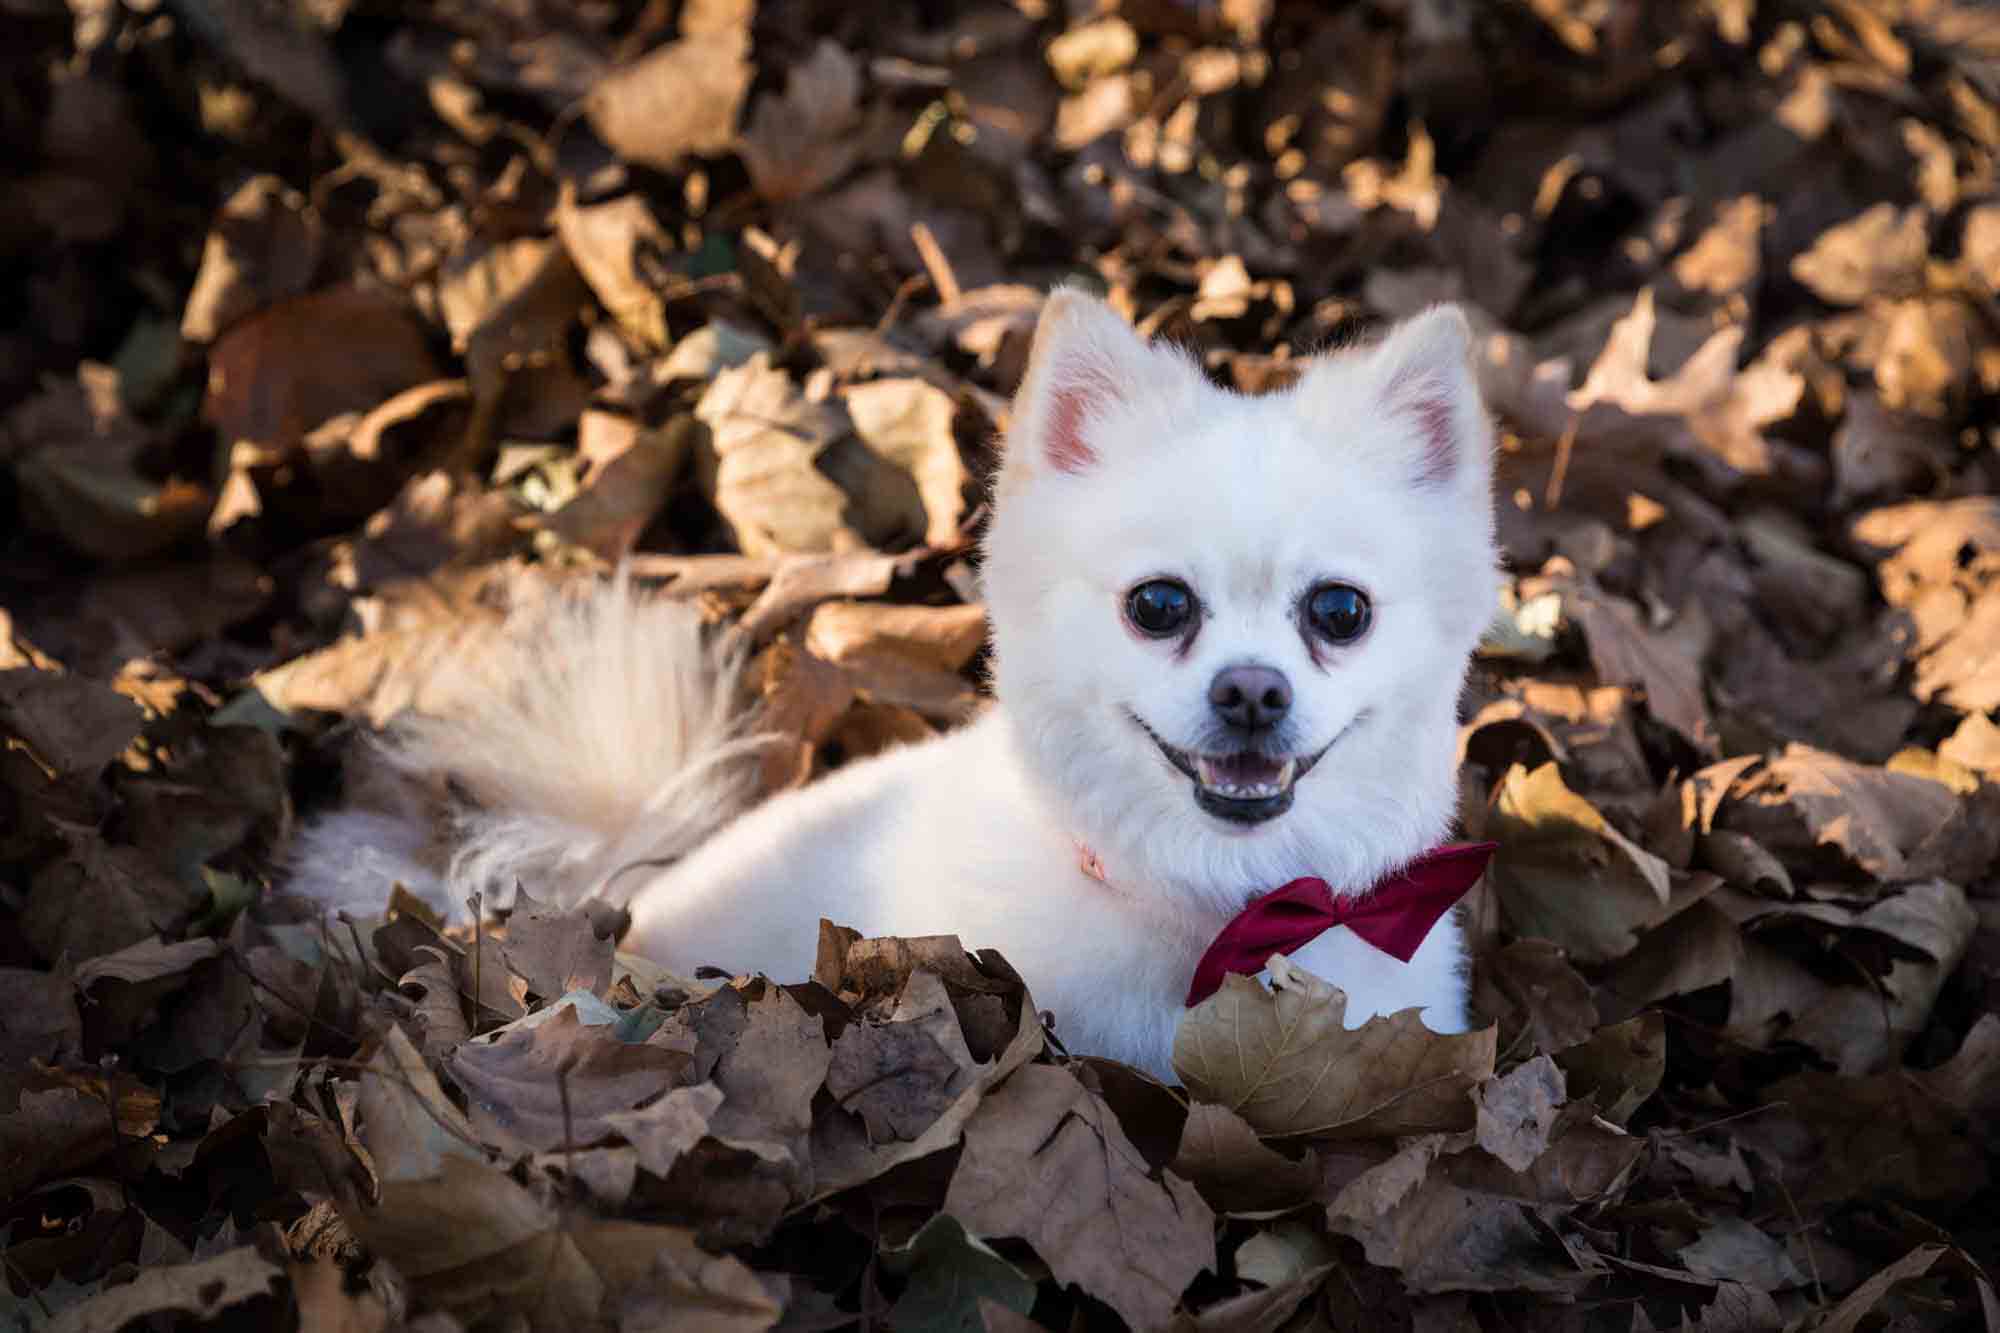 NYC pet portrait of white Pomeranian wearing red bow tie sitting in brown leaves